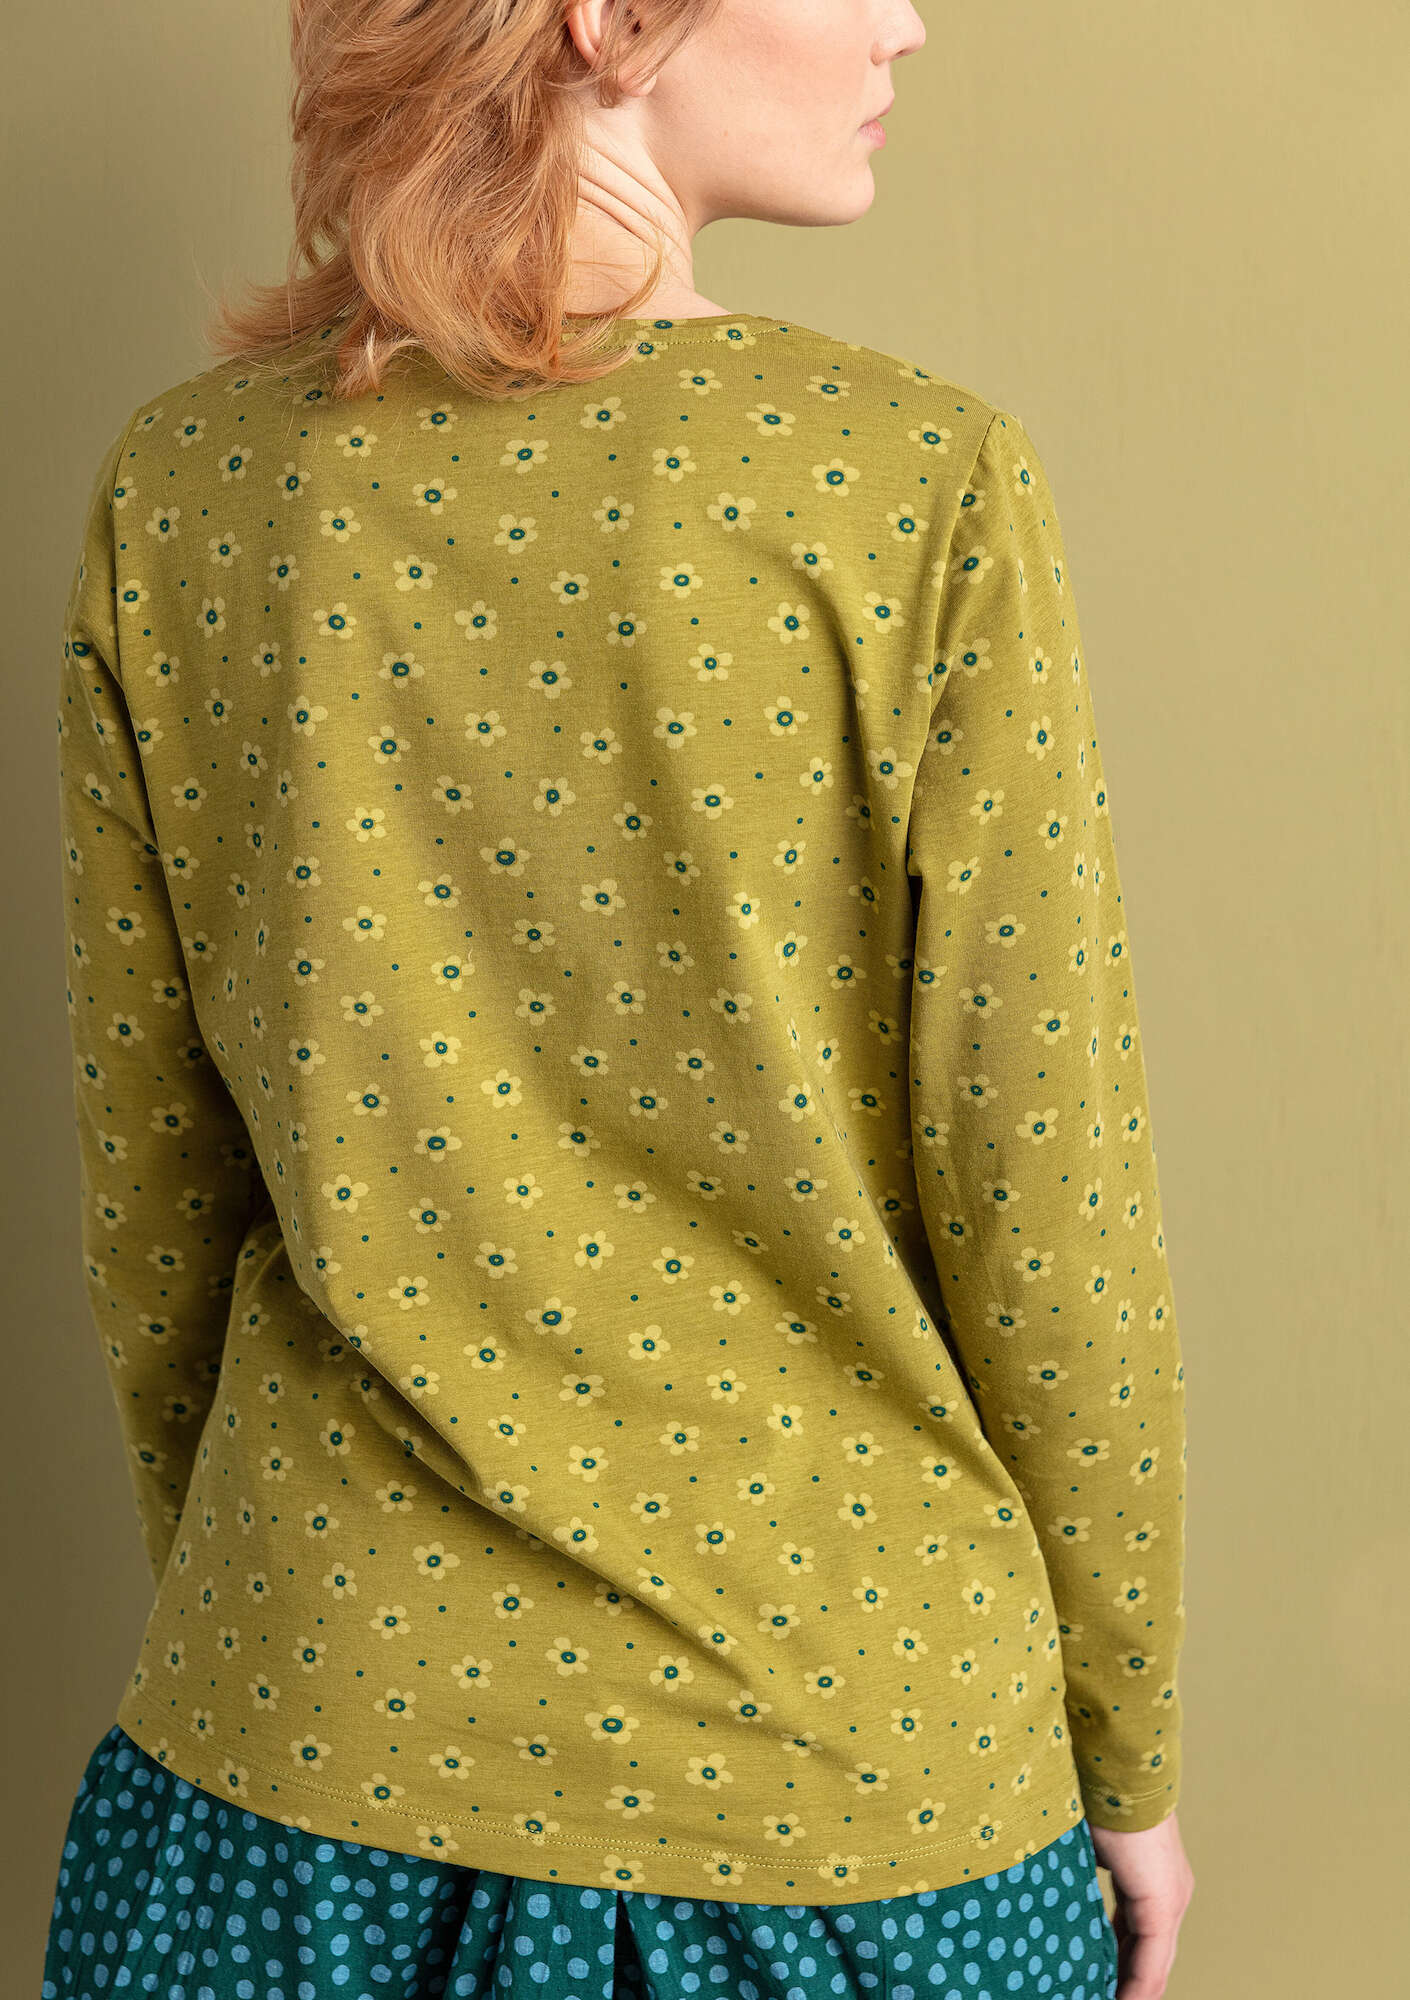 “Pytte” jersey top in organic cotton/spandex avocado/patterned